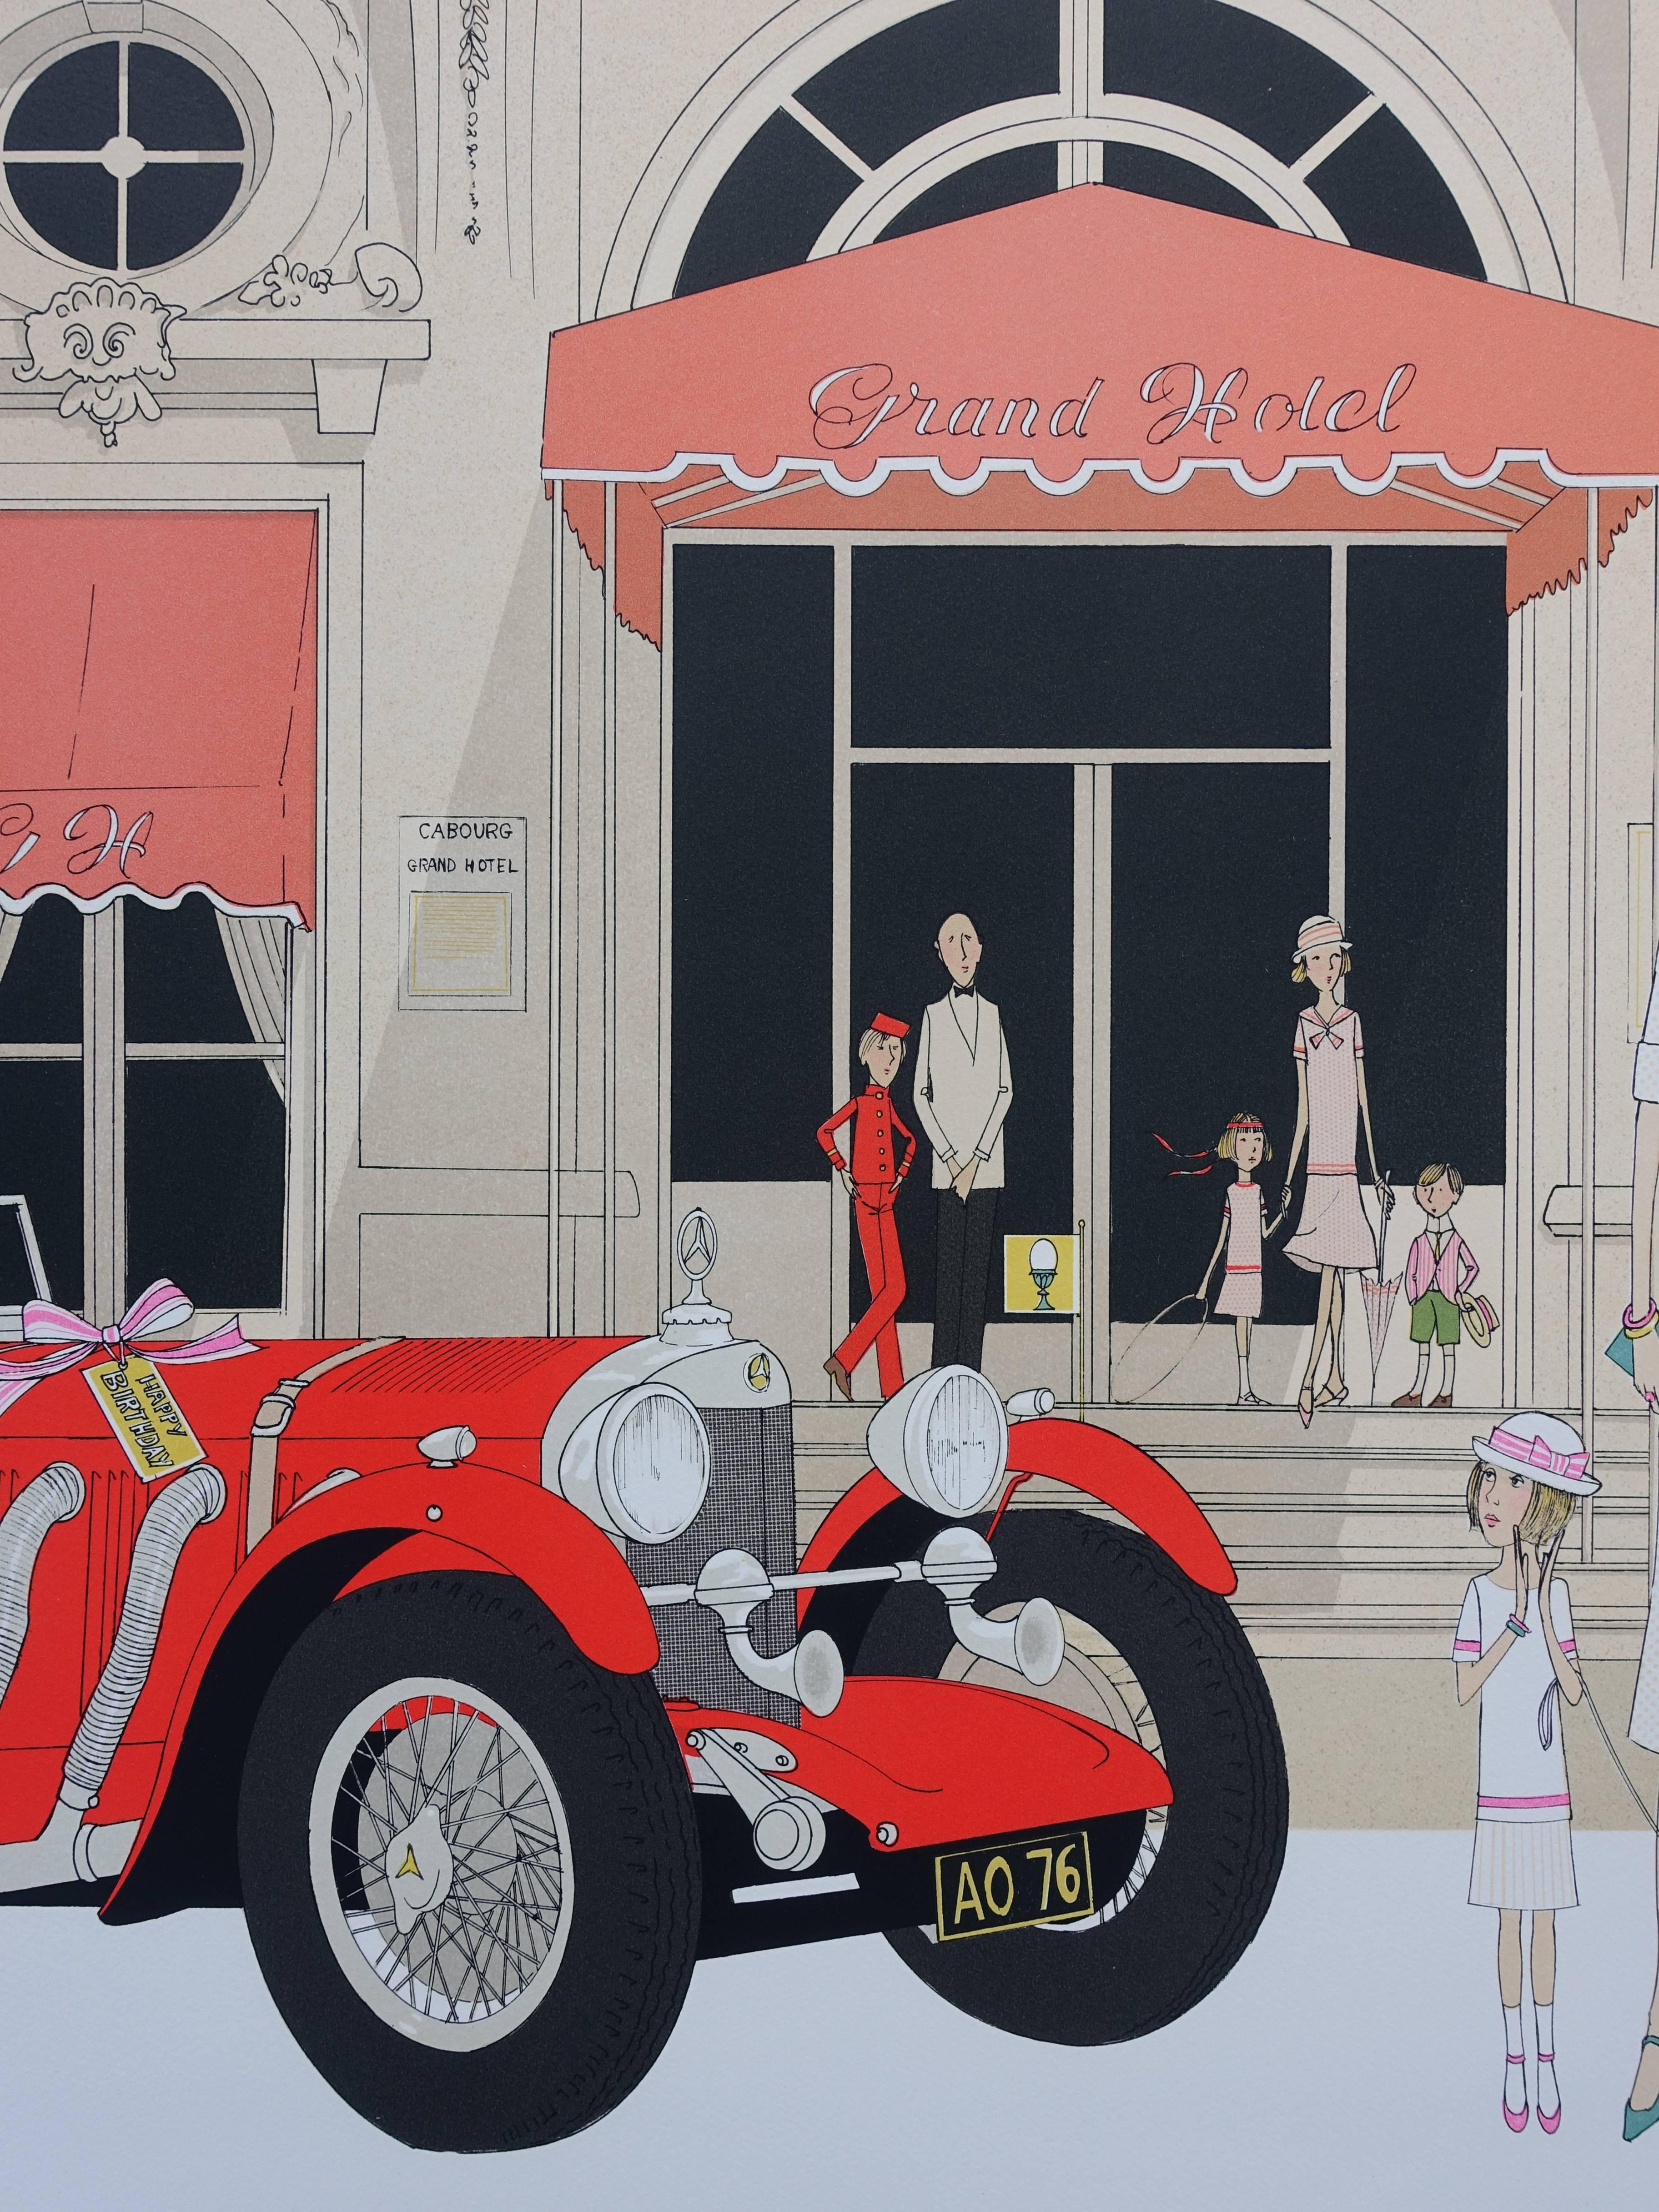 Denis-Paul NOYER
Mercedes 710 - Cabourg Grand Hotel

Original lithograph, c. 1980
Handsigned in pencil
Numbered / 115 copies
On Arches vellum 75 x 105 cm (c. 30 x 42 in)

INFORMATION : Cabourg Grand Hotel is a well known 5* hotel / palace located in